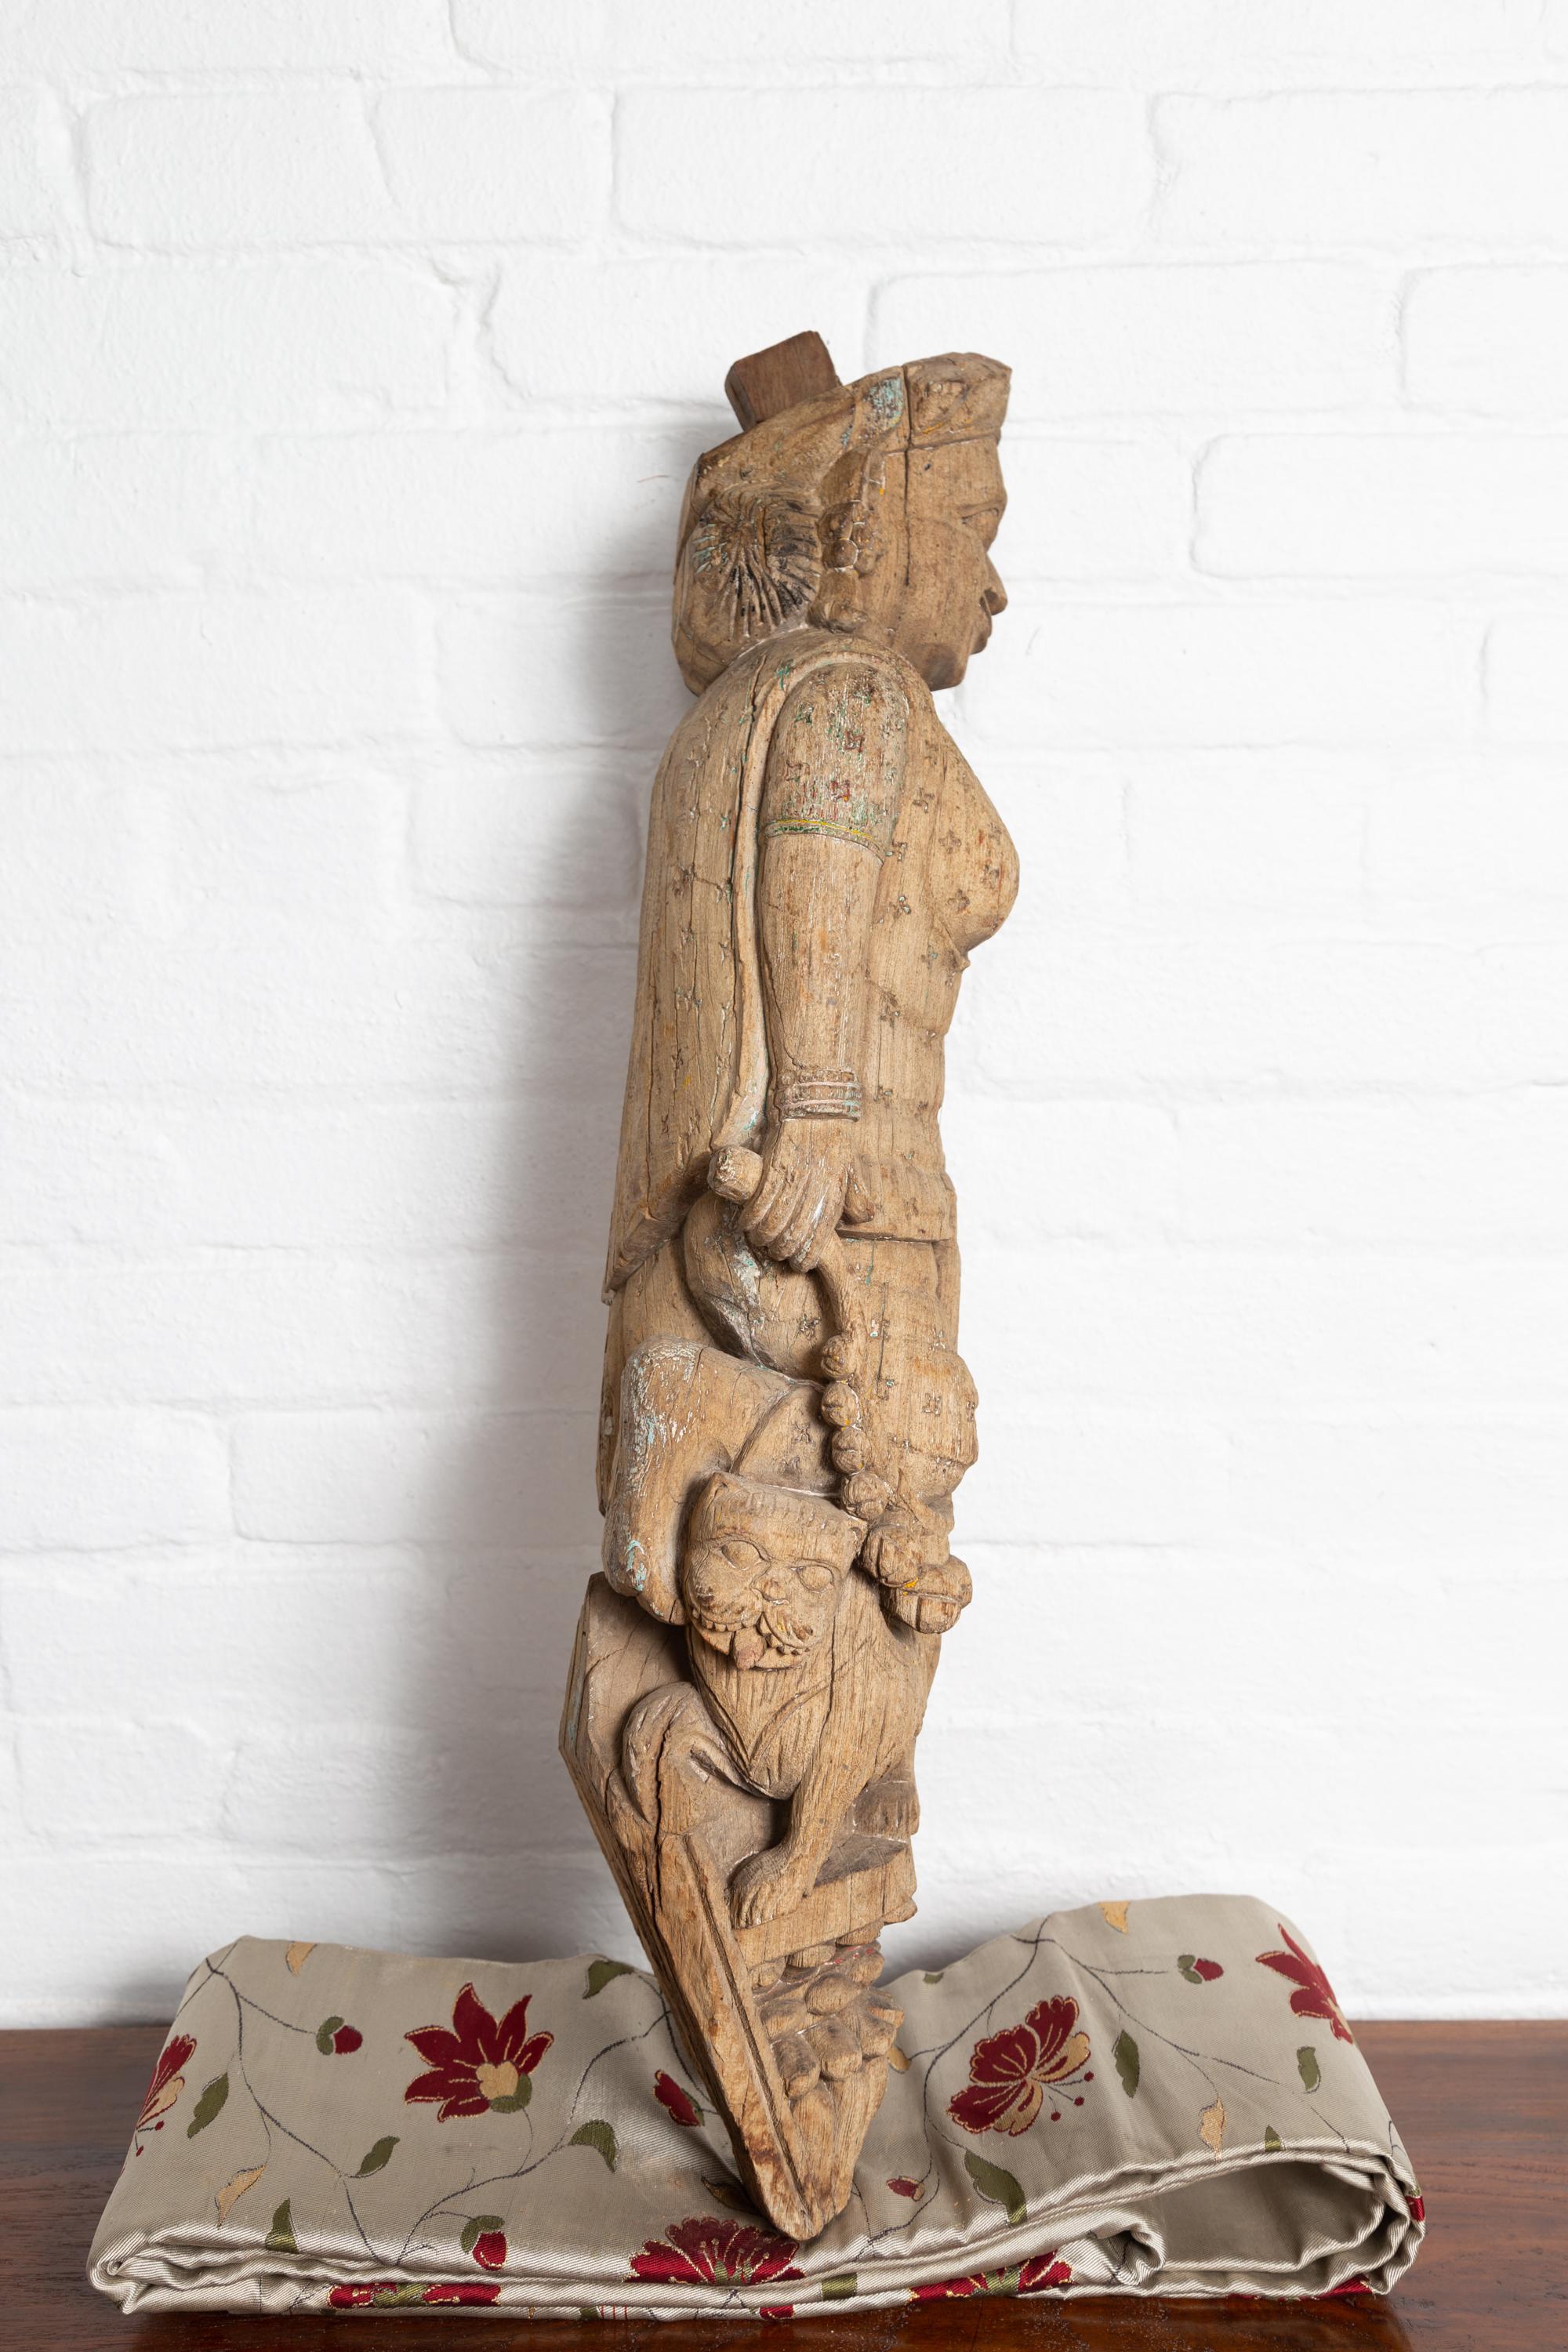 Wood Indian Gujarat Hand Carved Temple Carving Statue Depicting a Woman and a Feline For Sale